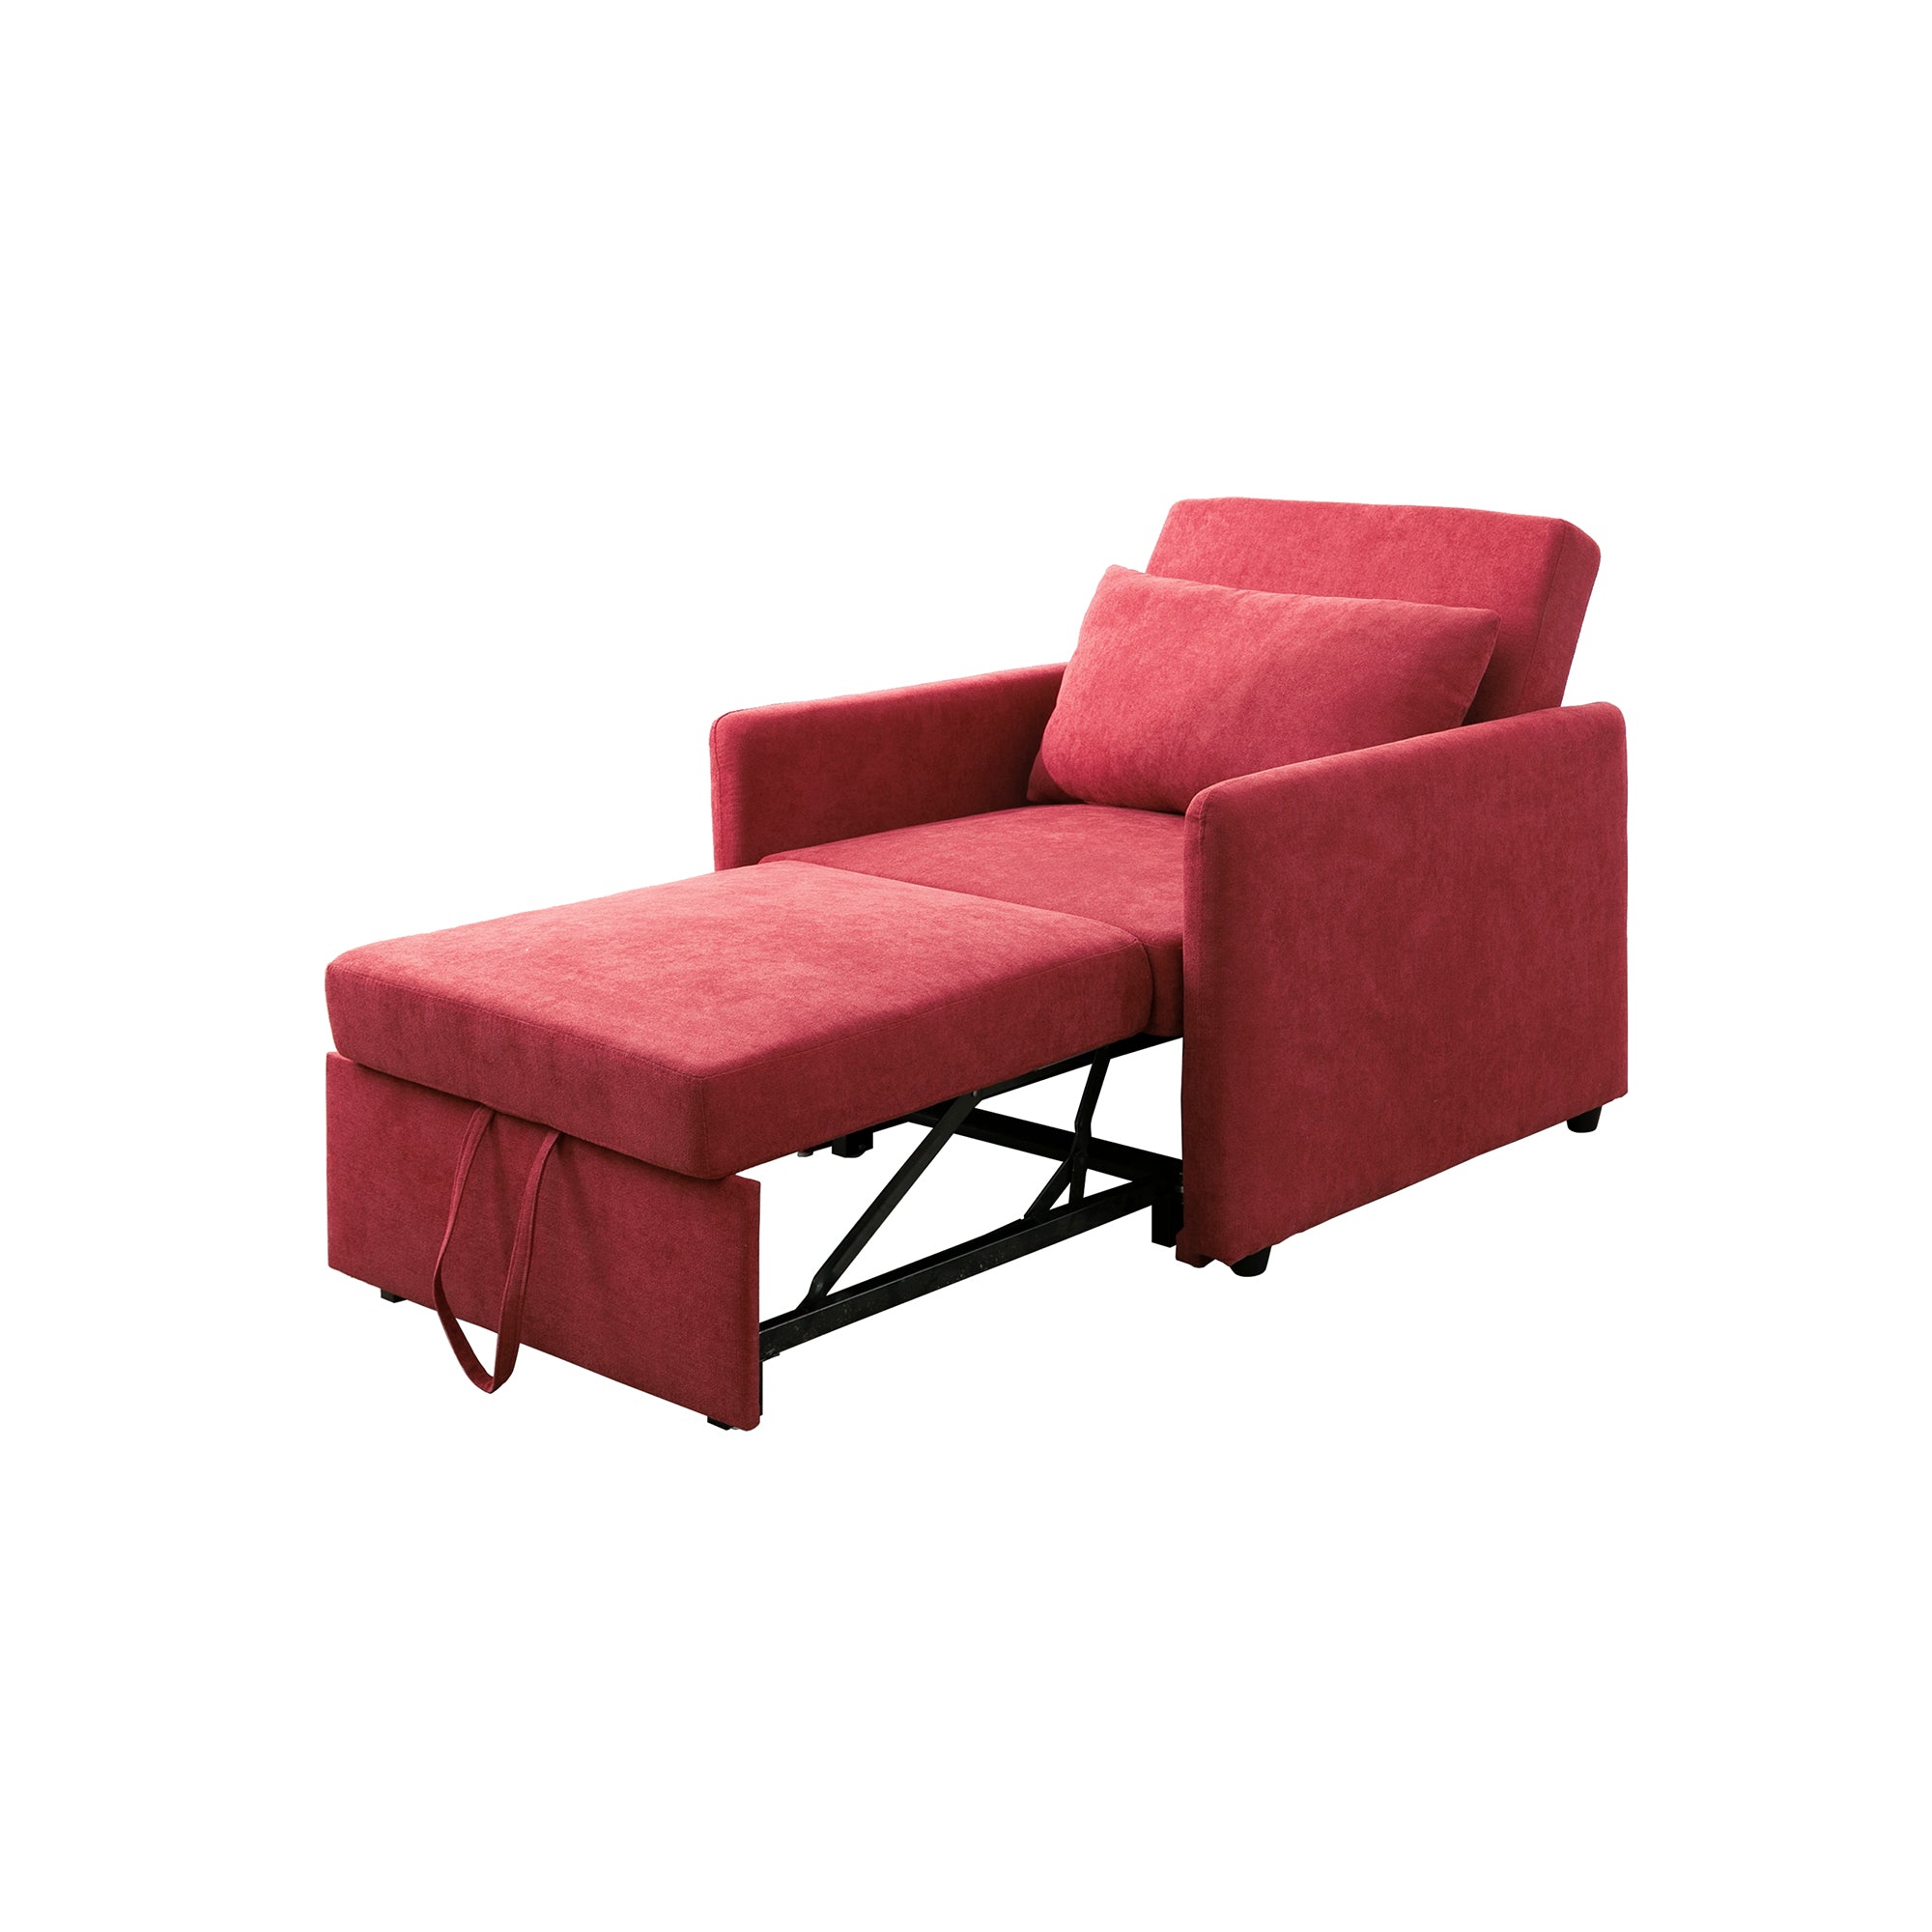 Ainehome Red Lint foldable Sofa bed